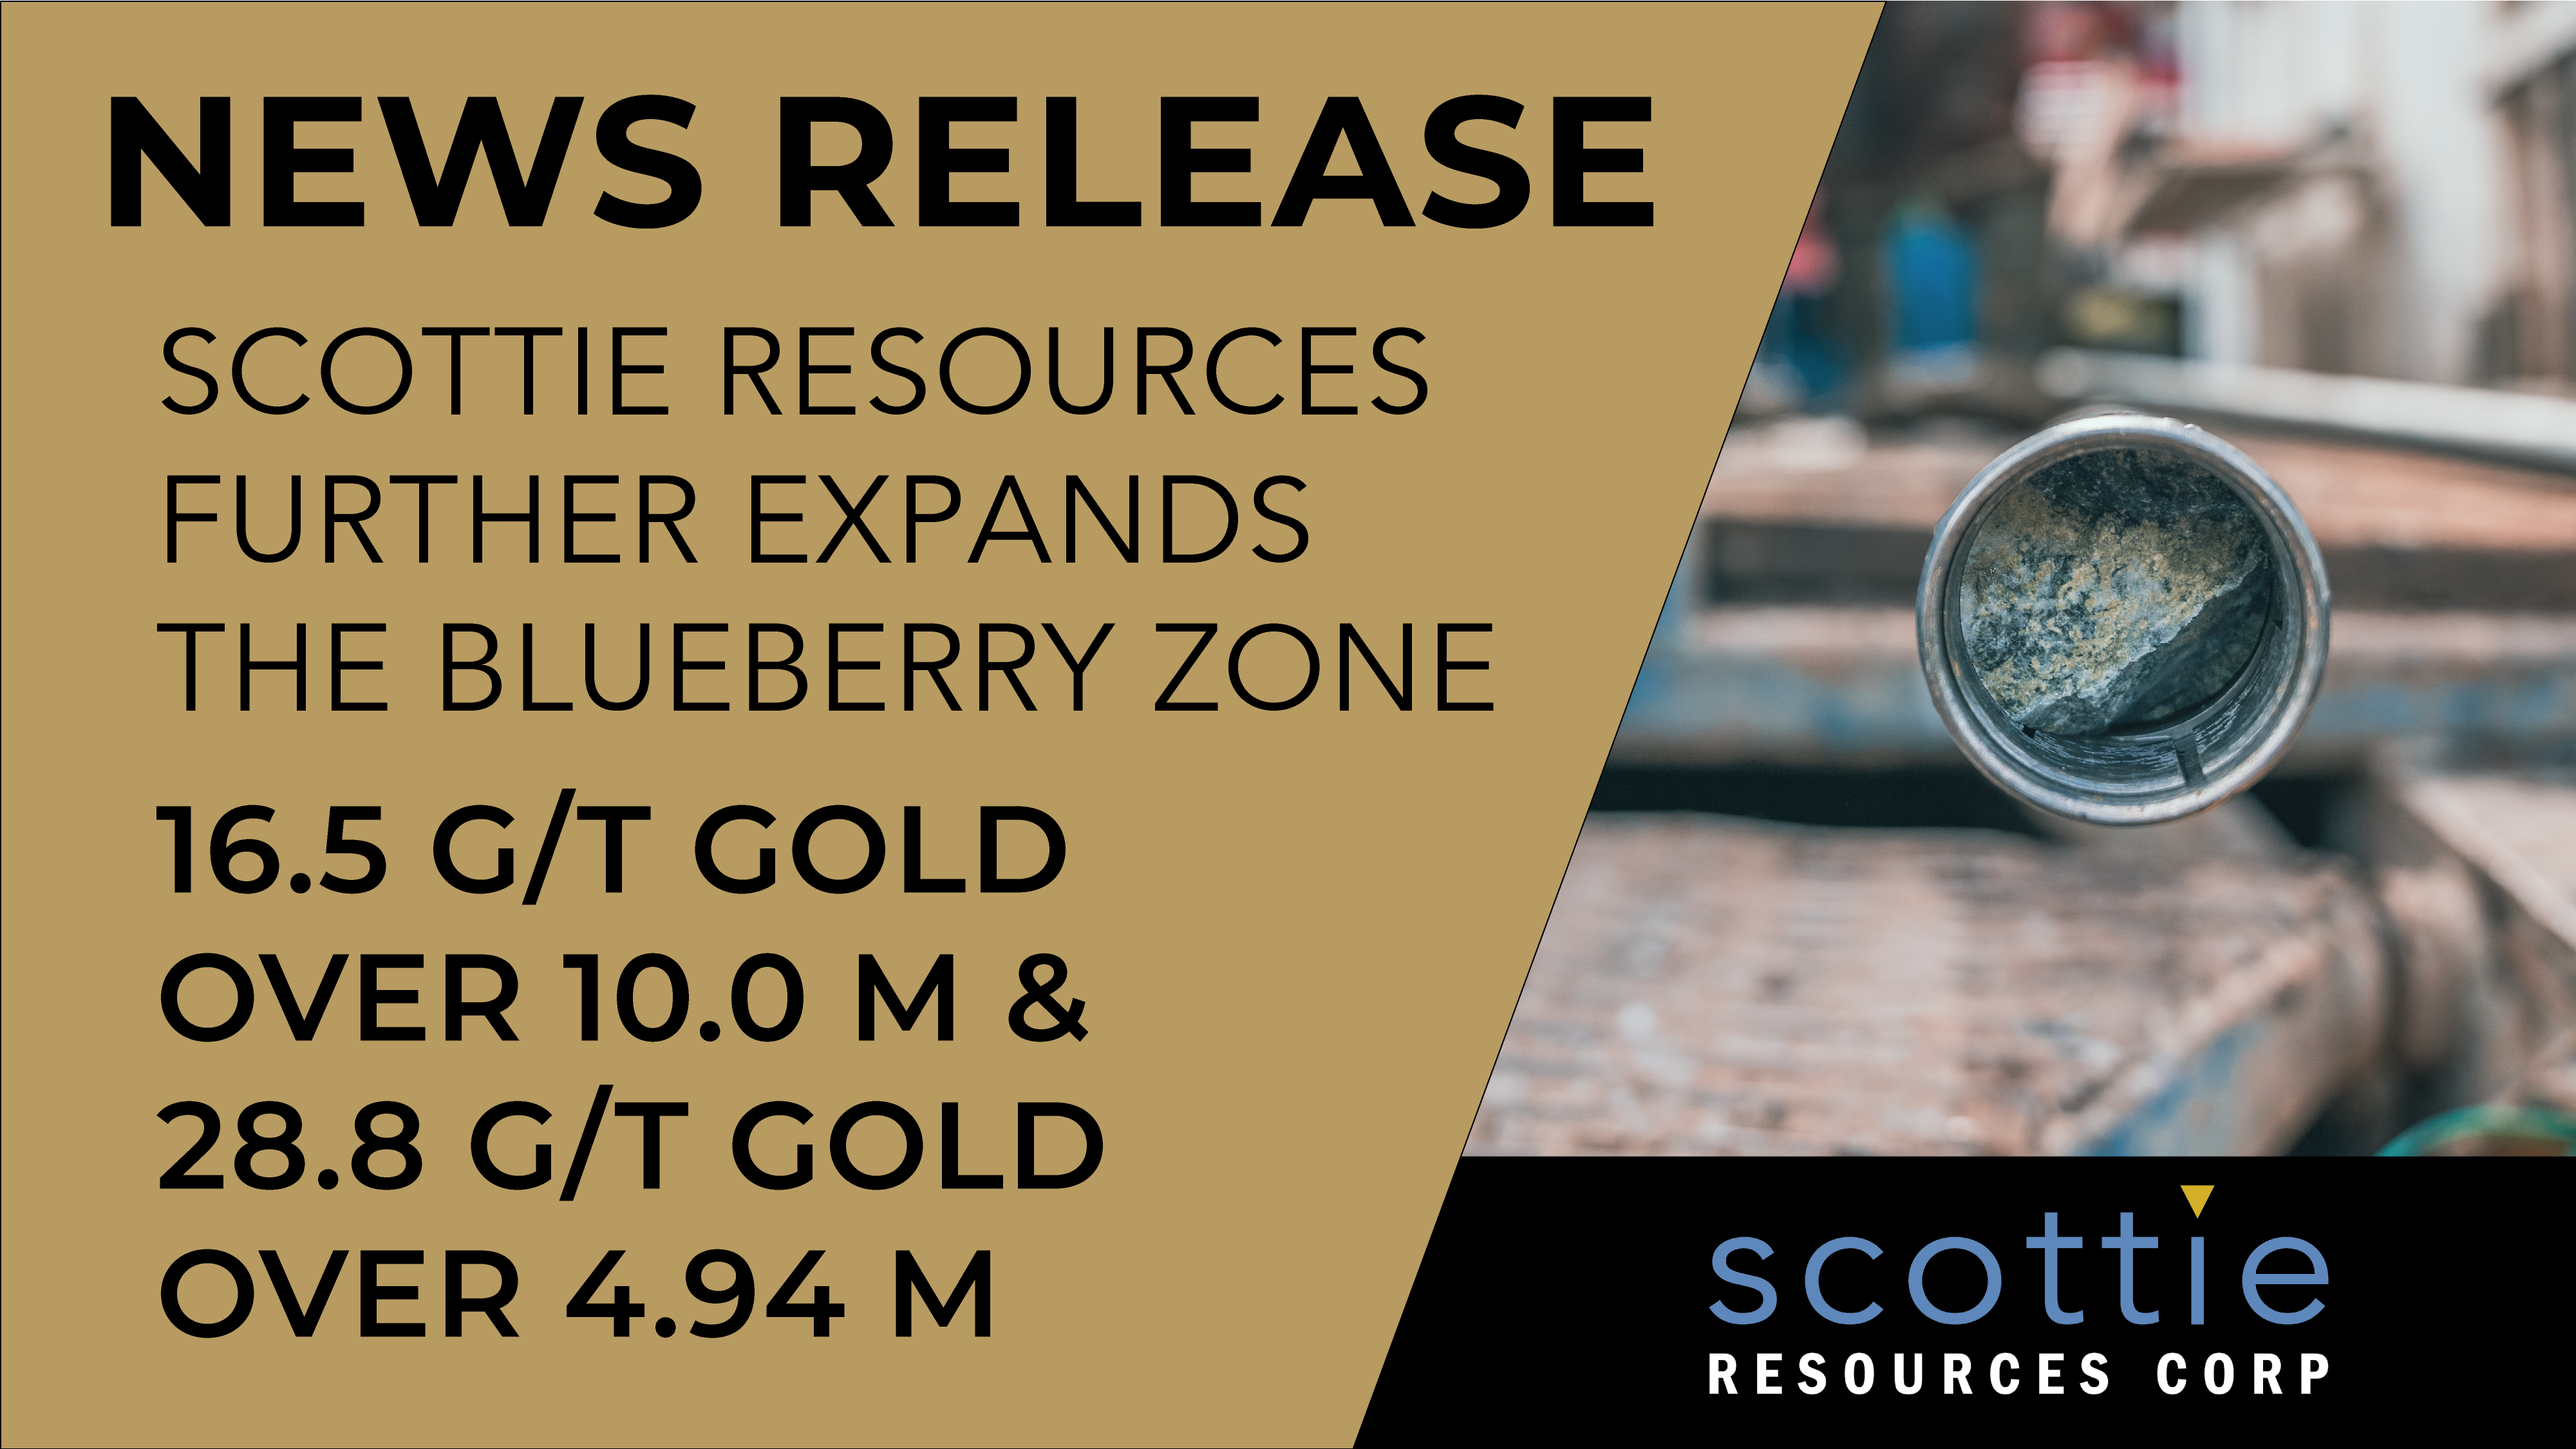 News Release | The Blueberry Zone | 2021/10/07